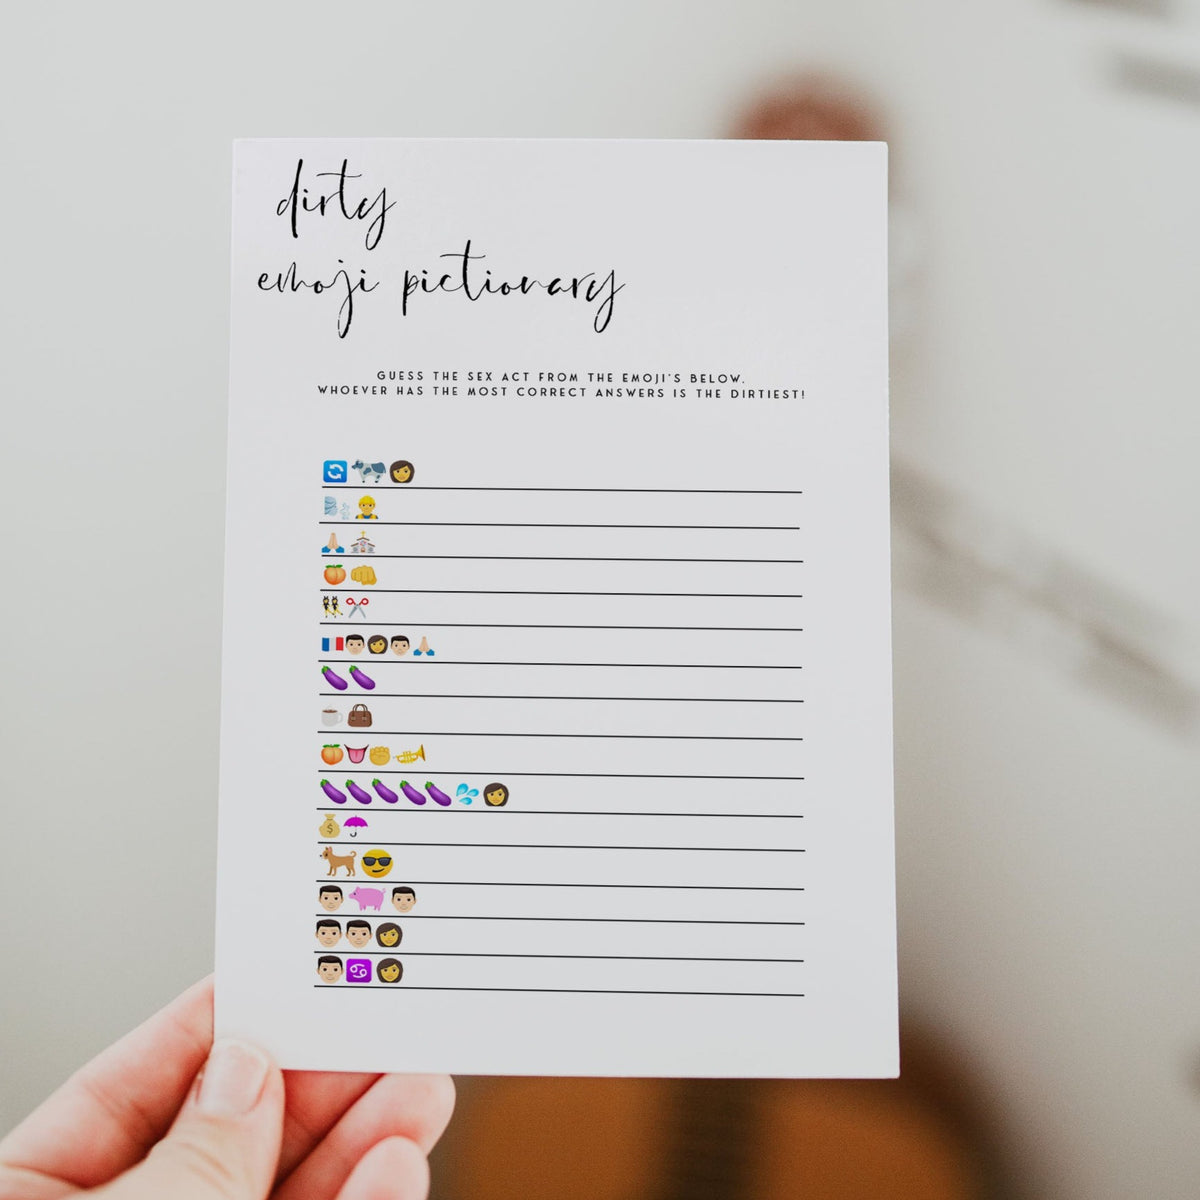 Fully editable and printable bridal shower dirty emoji pictionary game with a modern minimalist design. Perfect for a modern simple bridal shower themed party